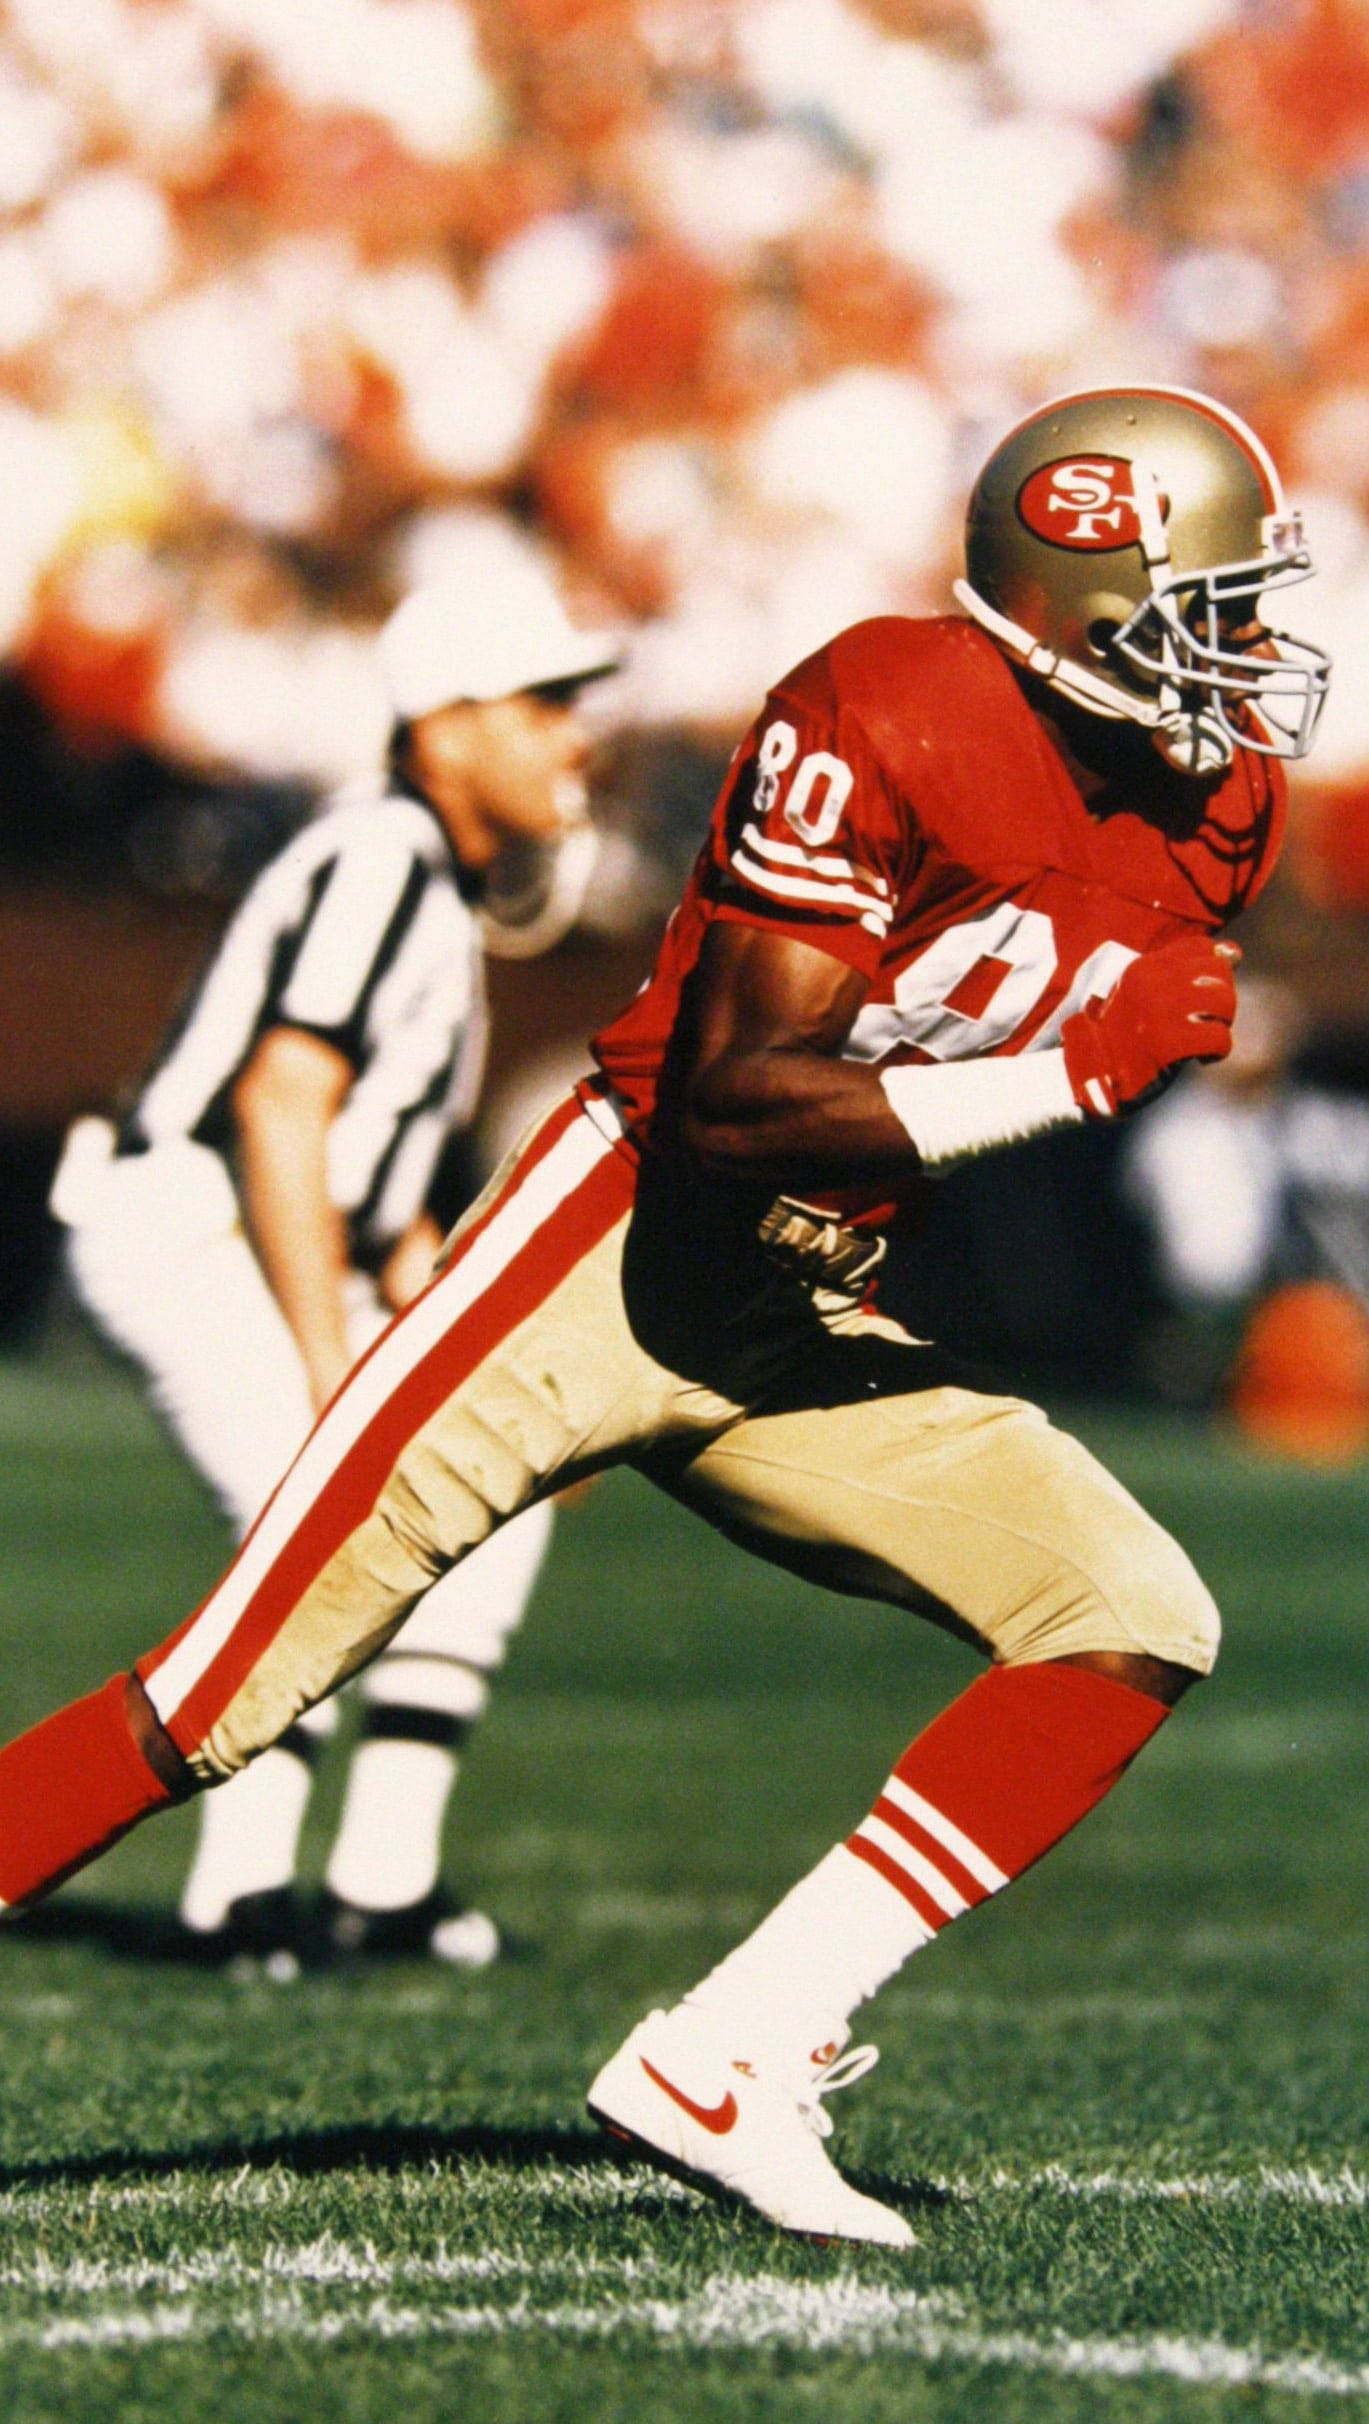 Jerry Rice In Field 49ers Iphone Wallpaper